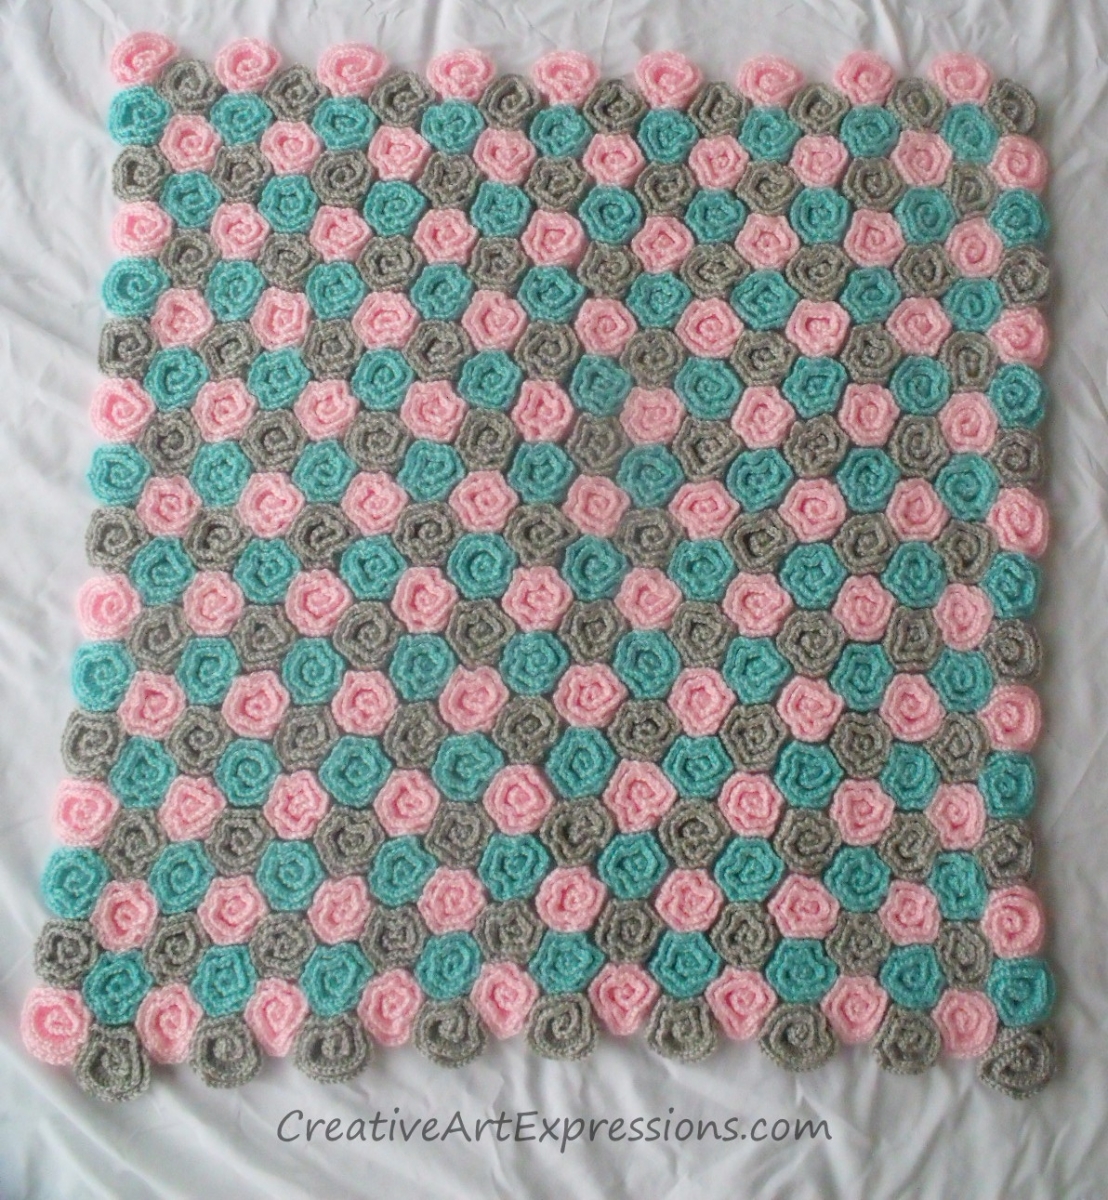 Creative Art Expressions Hand Crocheted Roses Baby Blanket